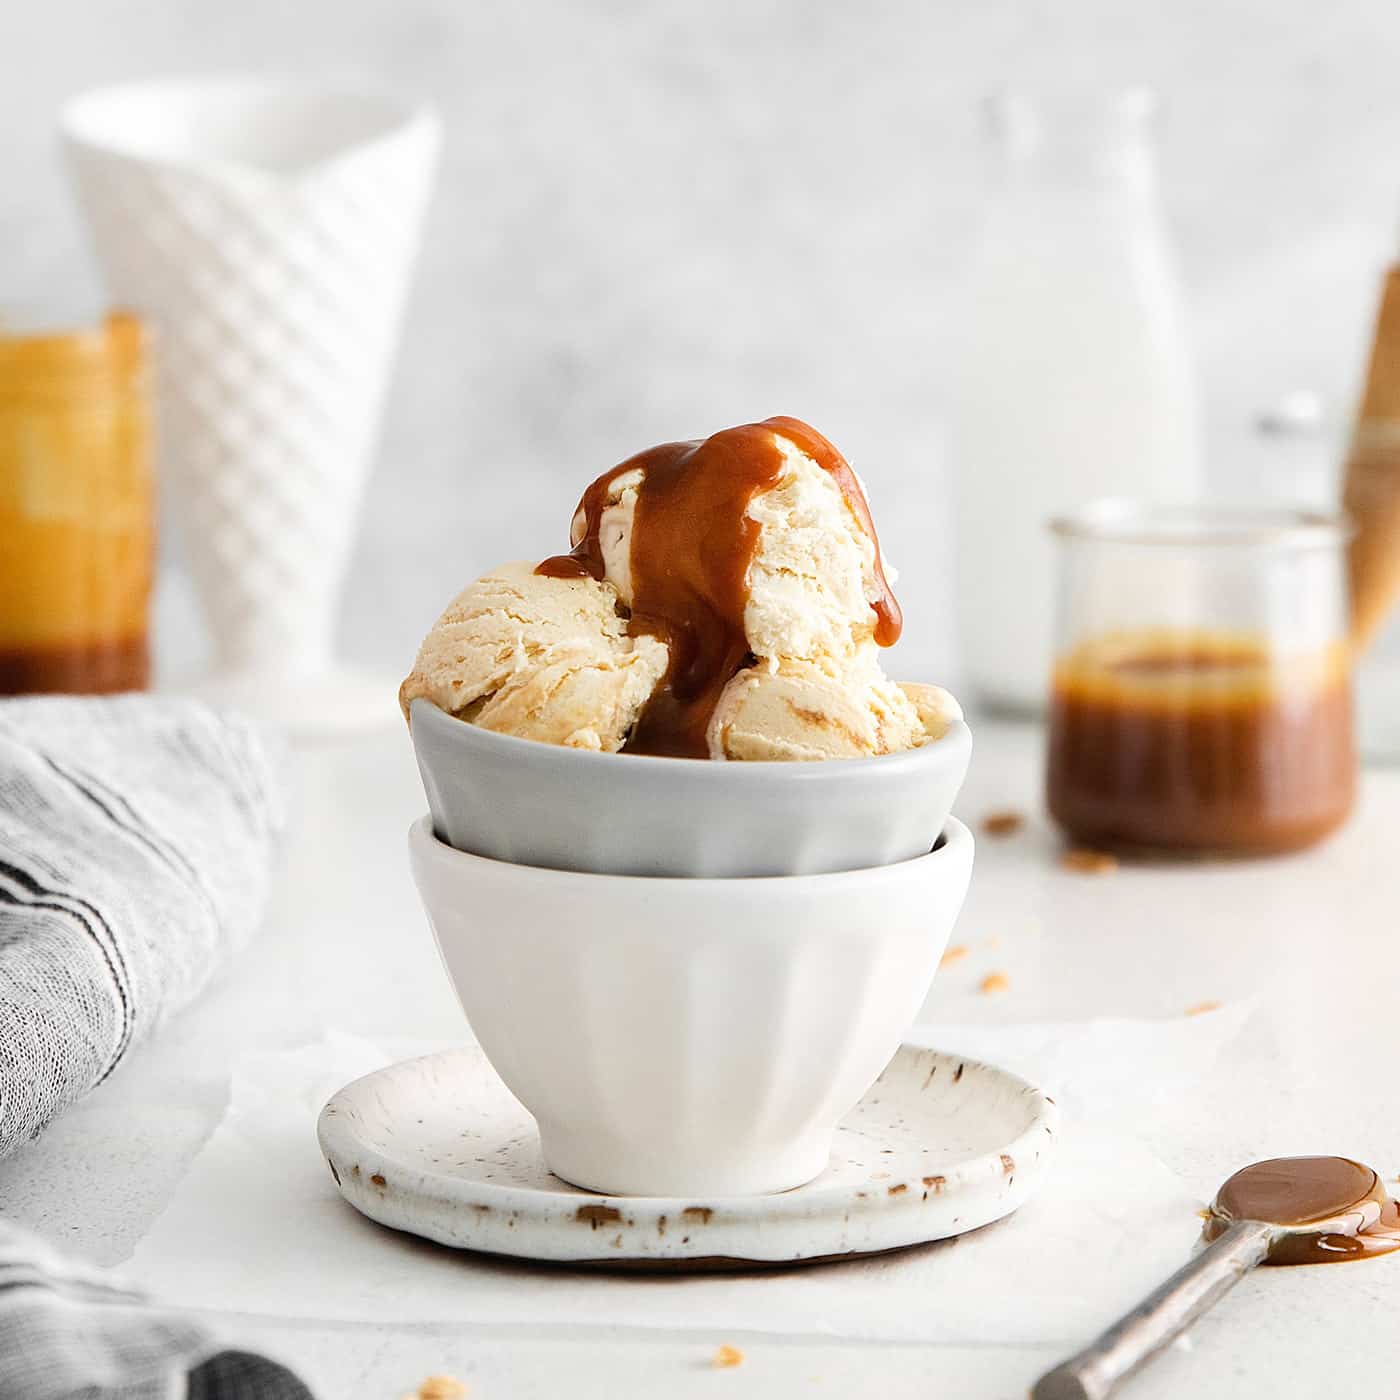 A bowl of ice cream topped with caramel sauce